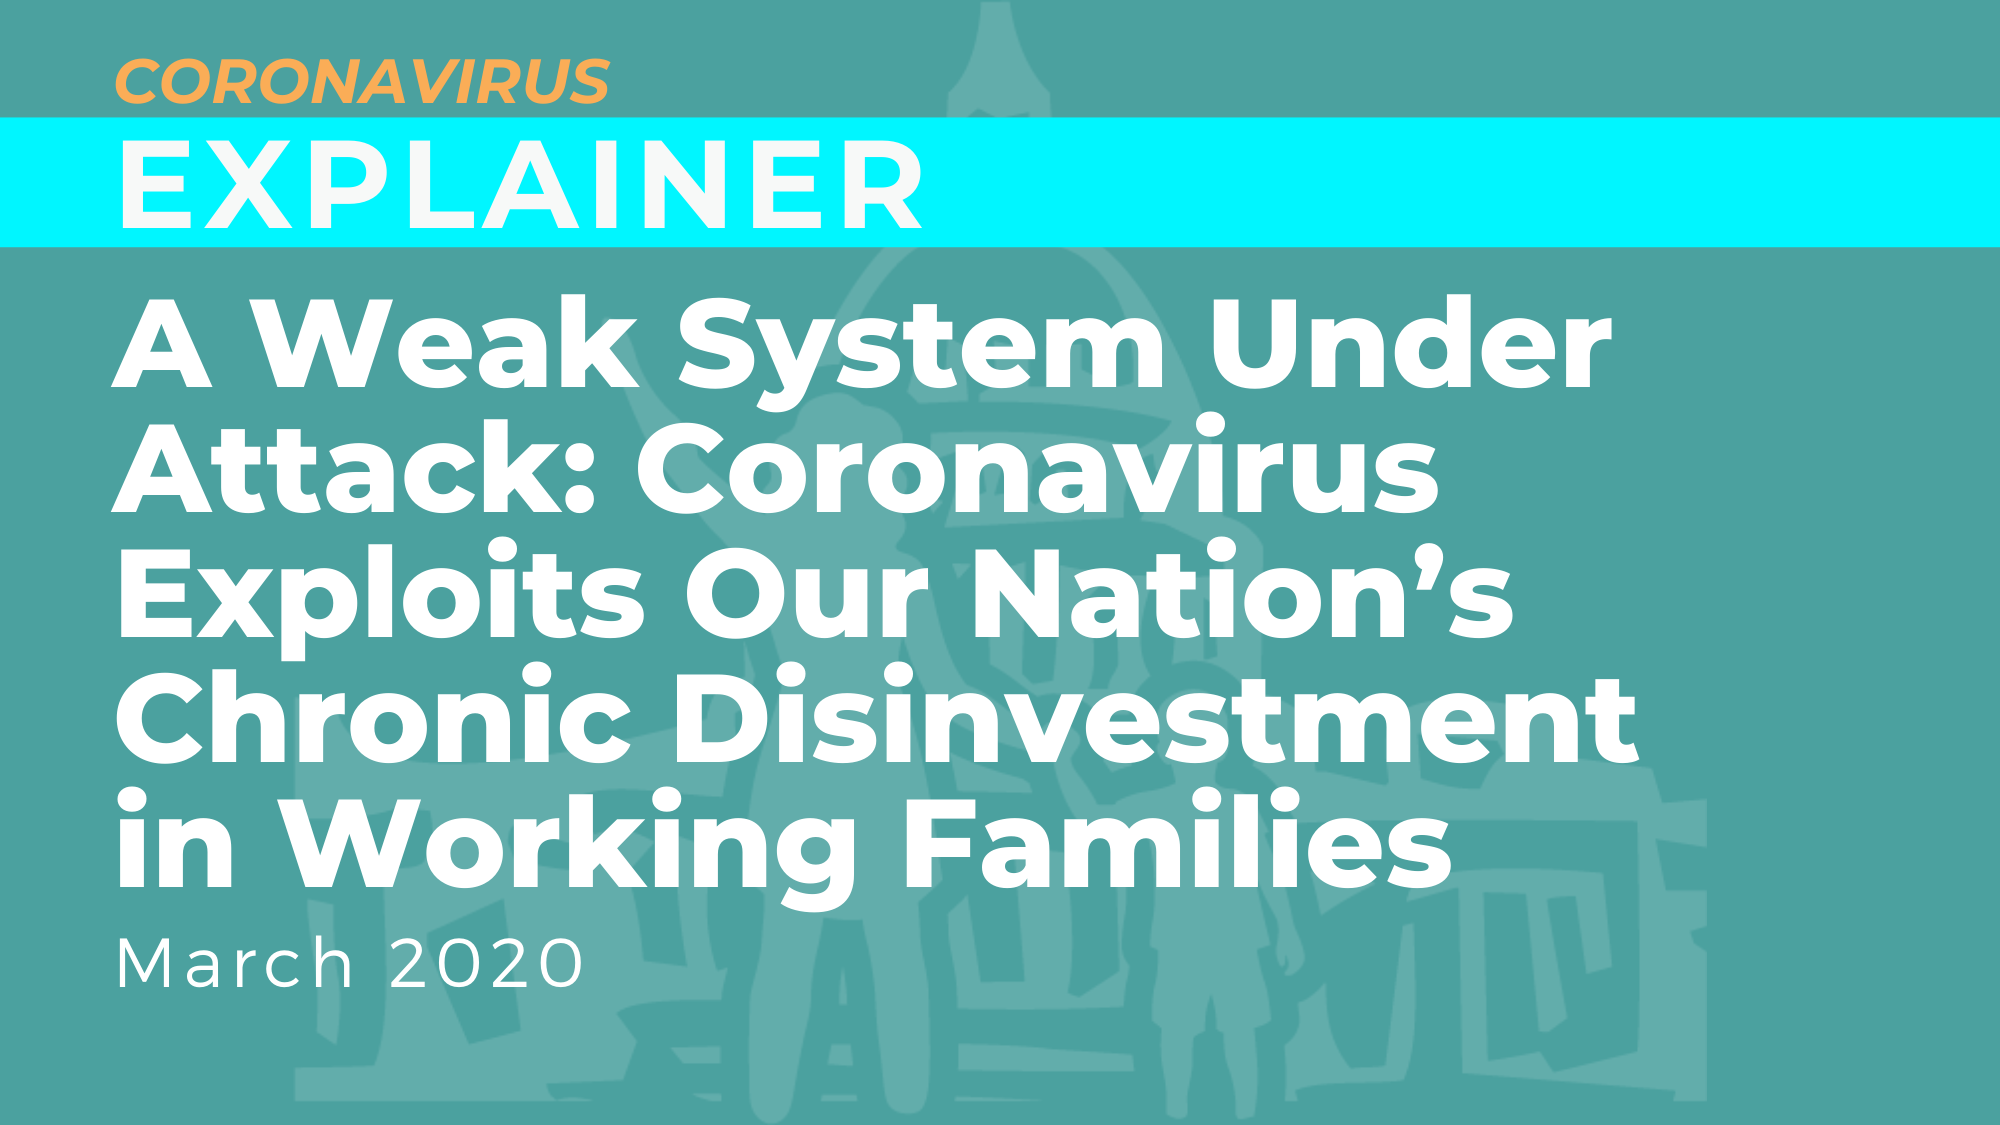 A Weak System Under Attack: Coronavirus Exploits Our Nation's Chronic Disinvestment in Working Families